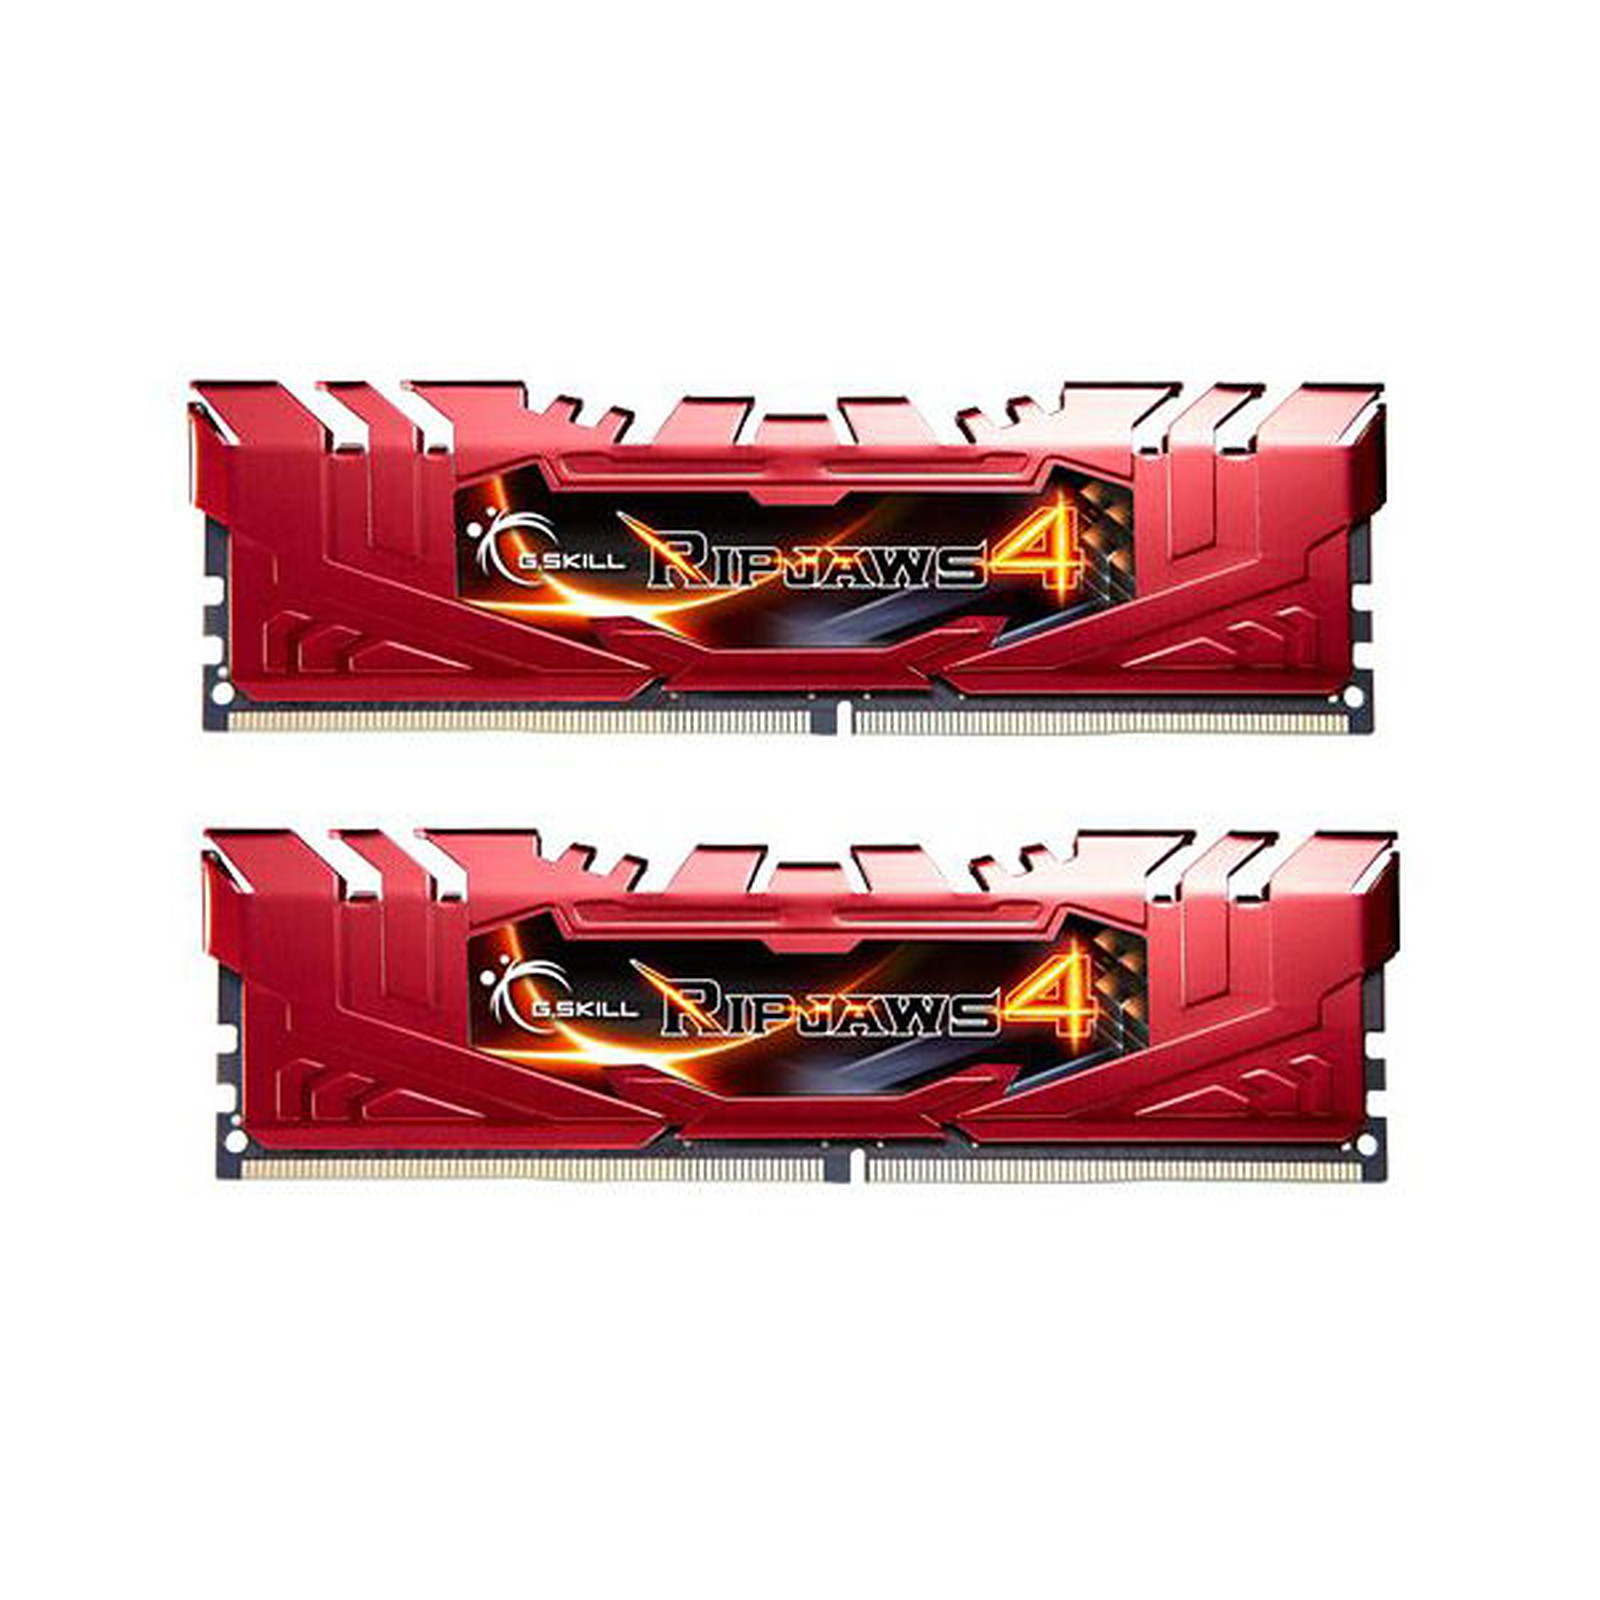 G.Skill RipJaws 4 Series Rouge 8 Go (2x 4 Go) DDR4 2133 MHz CL15 - Memoire PC G.Skill